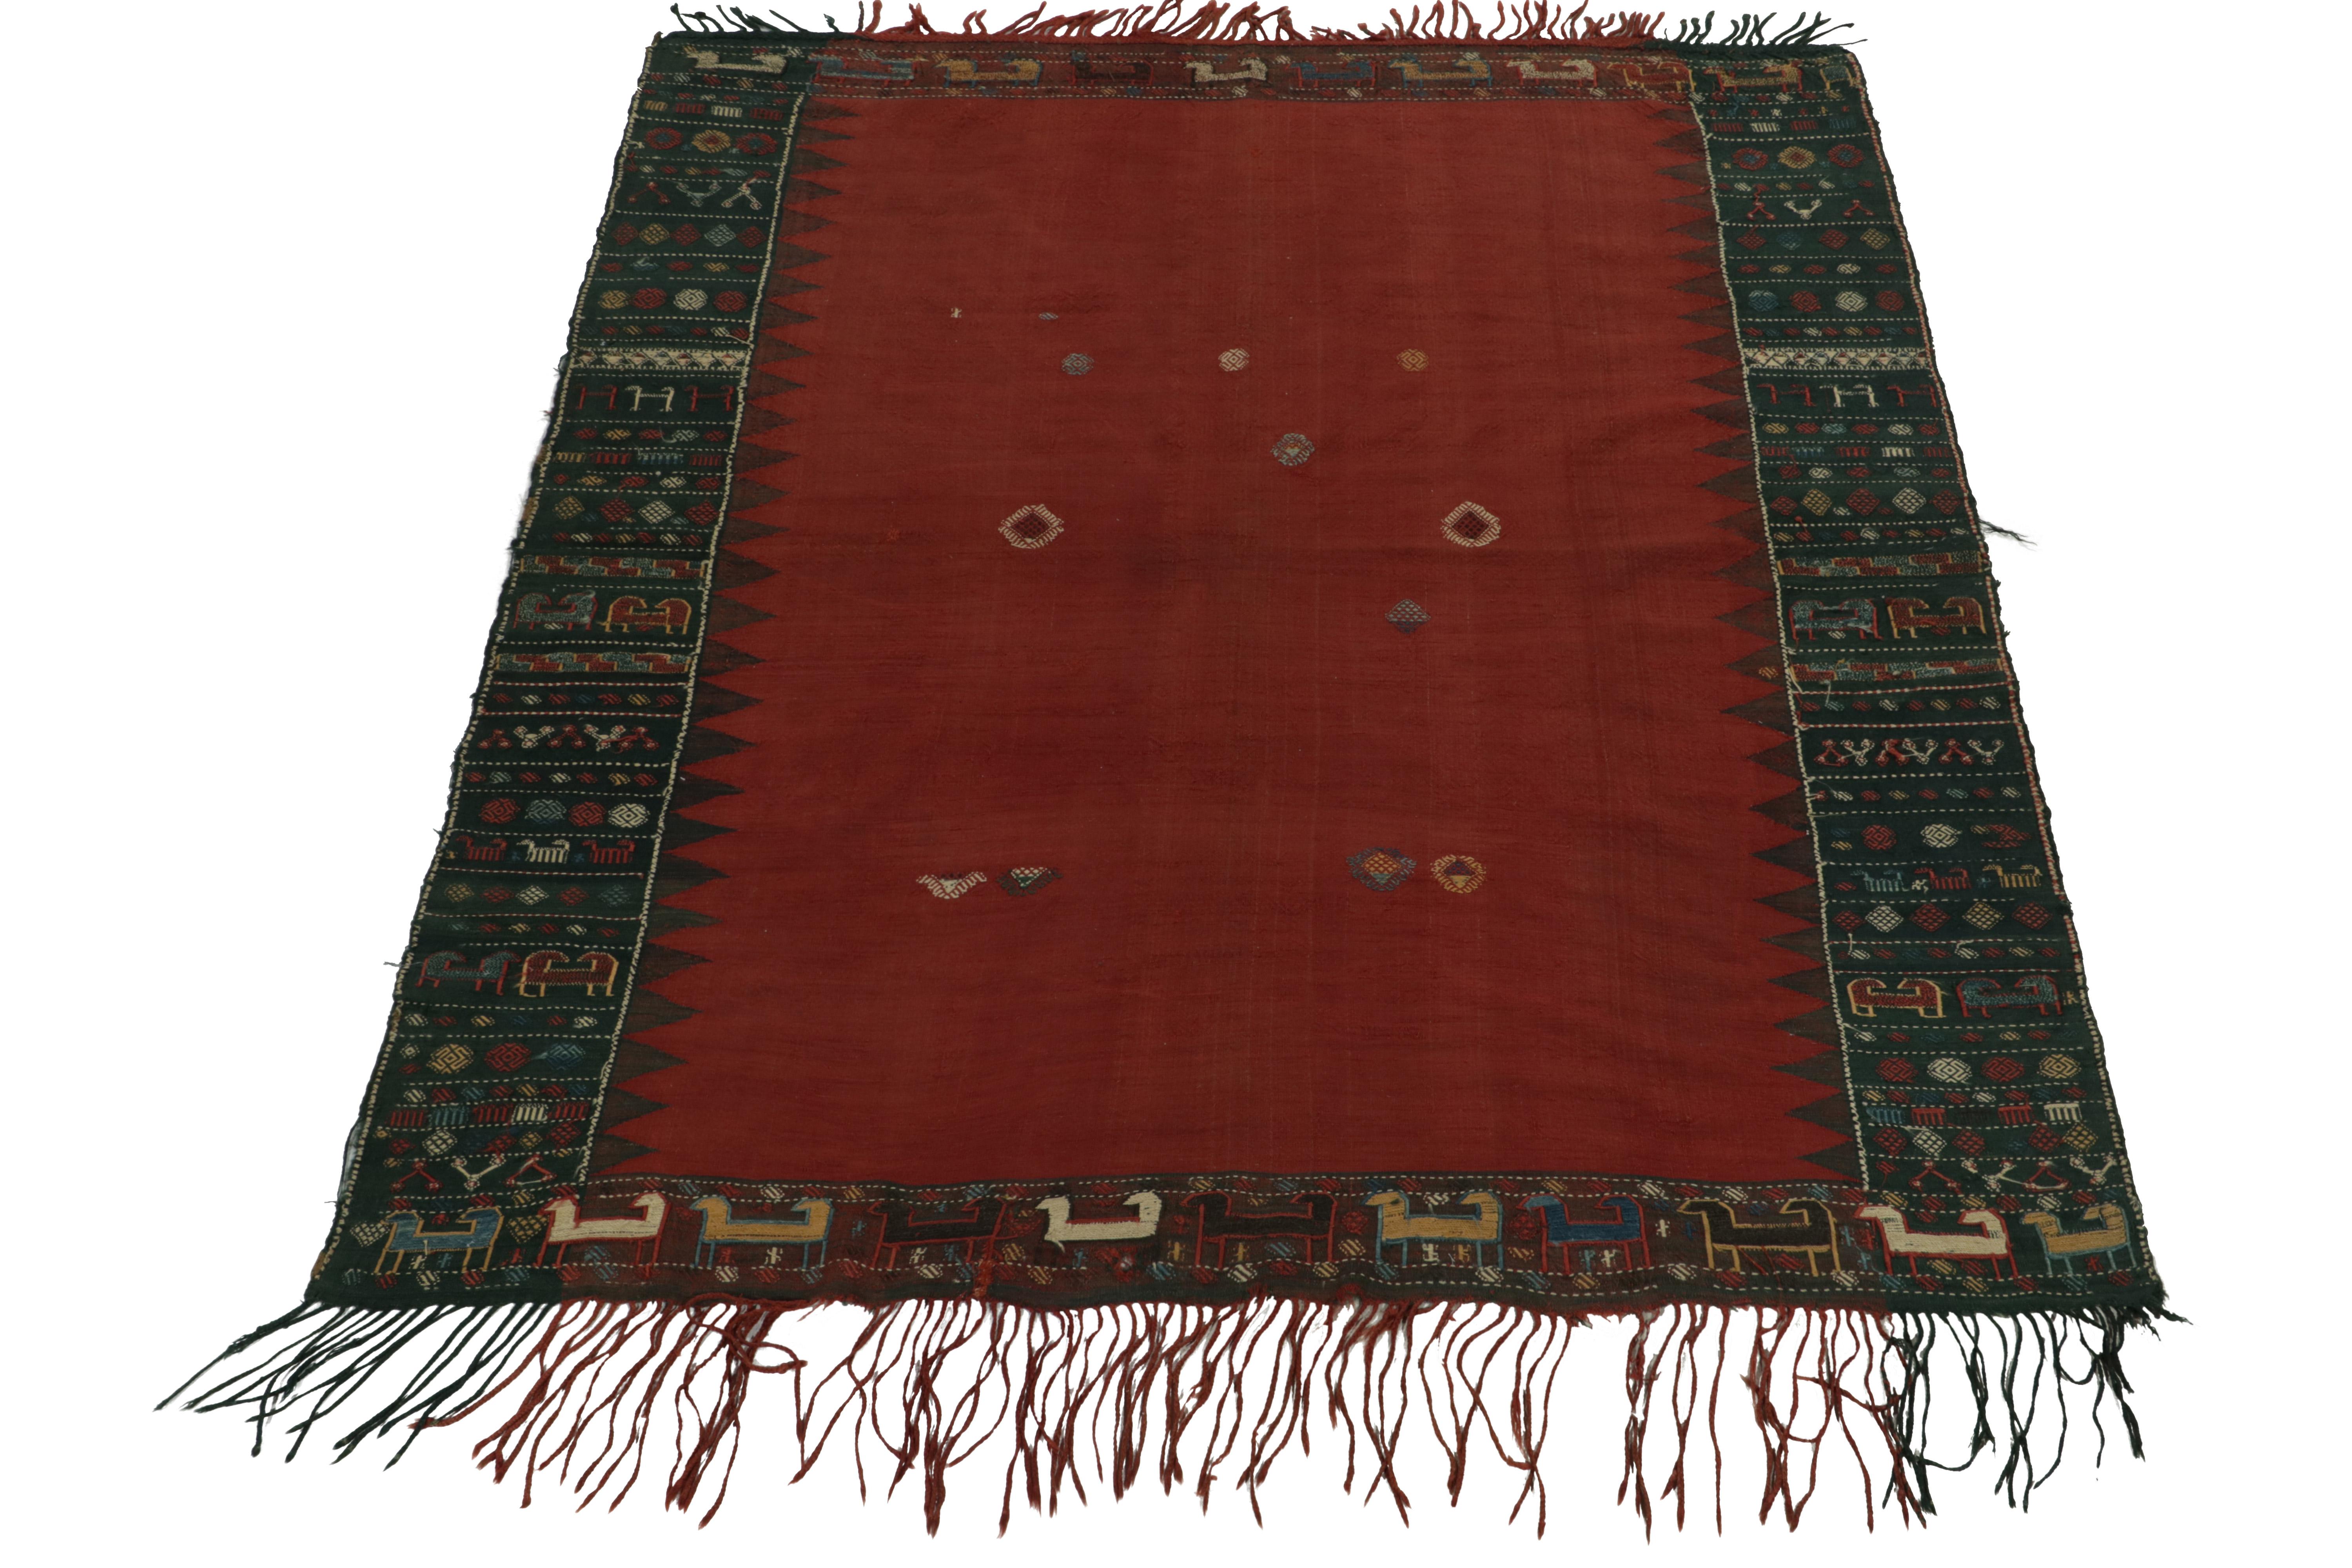 From our celebrated flatweave collection, a 5x7 antique Soumak kilim rug originating from Russia circa 1910-1920. The collectible opts for minimalism in the near-open field relishing rich red & black for an intriguing depth in the border amplifying